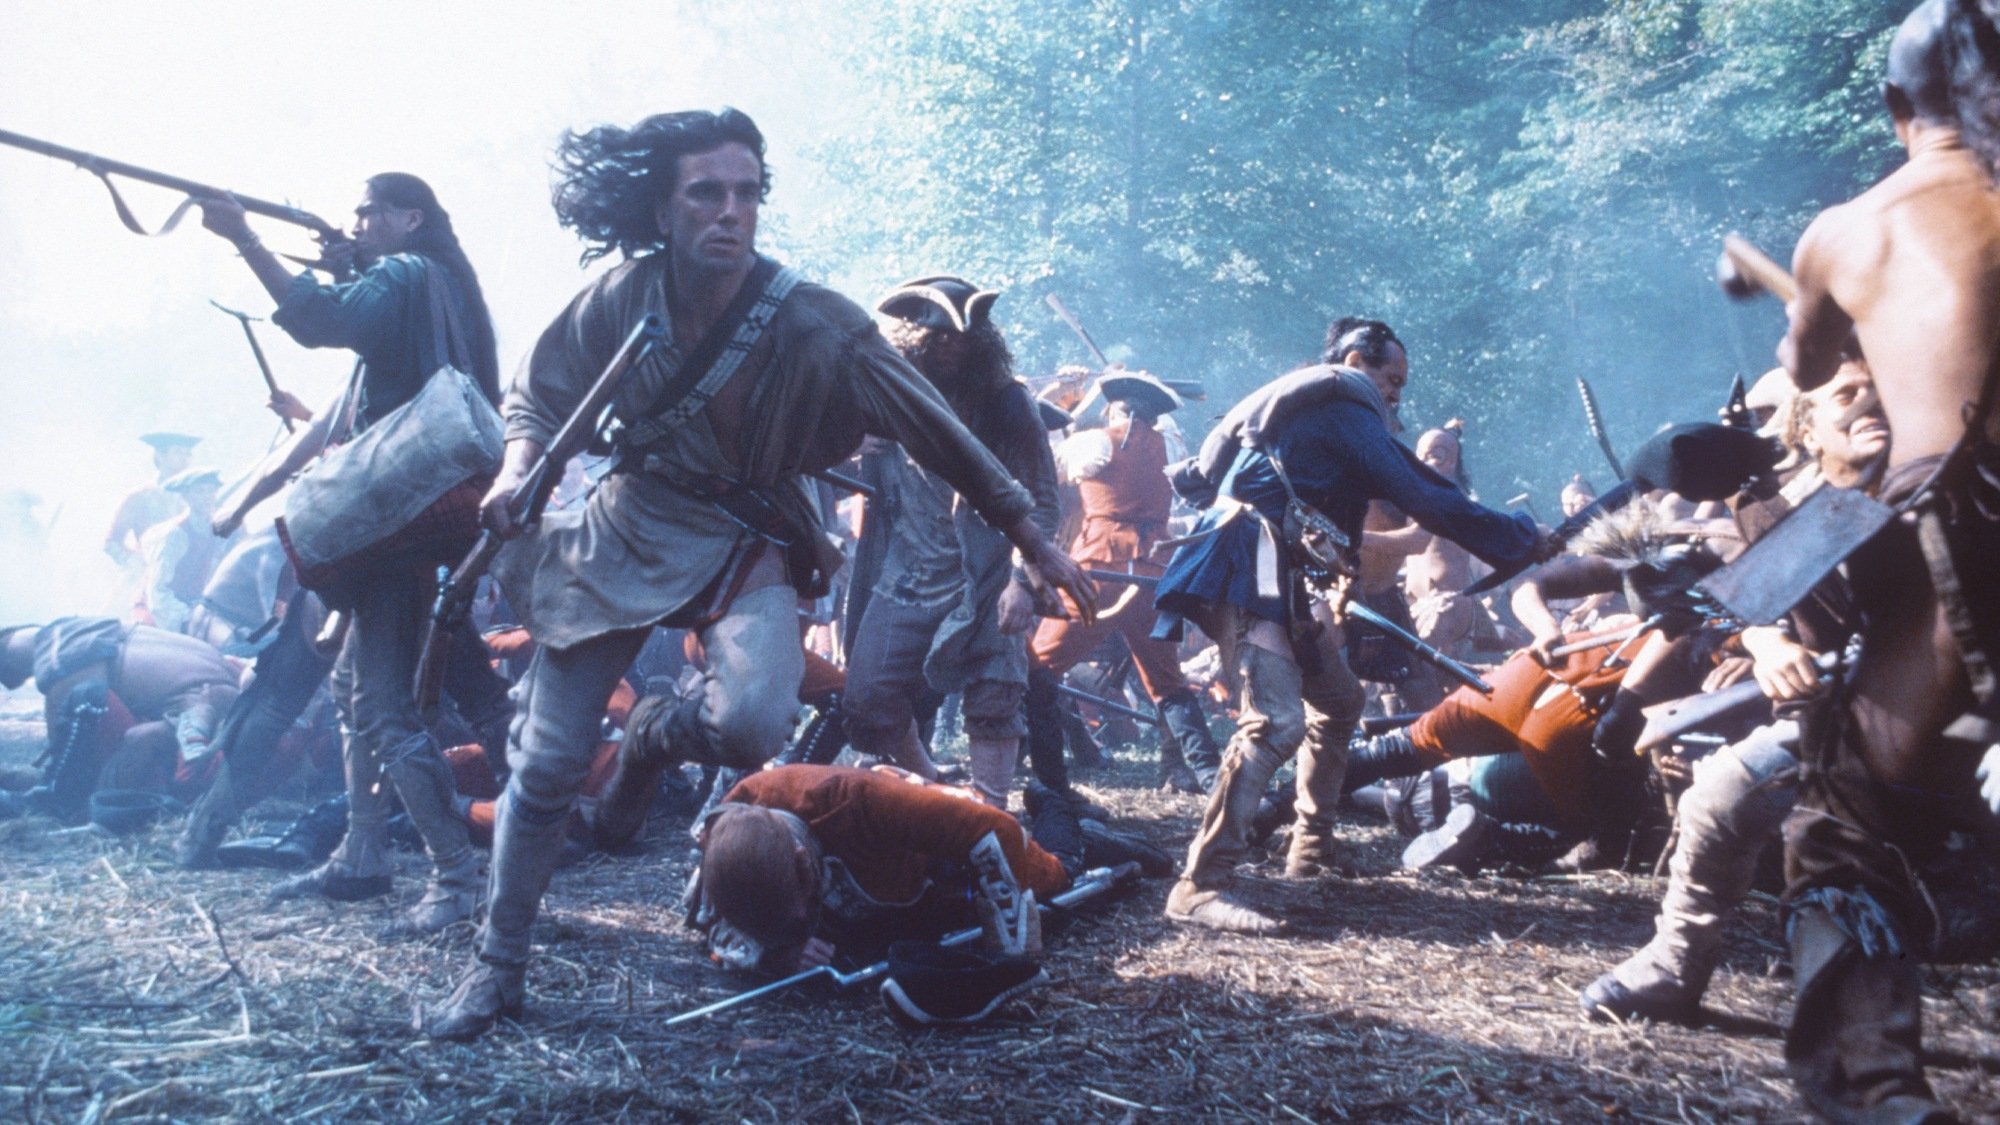 Daniel Day-Lewis stars in "The Last Of The Mohicans."